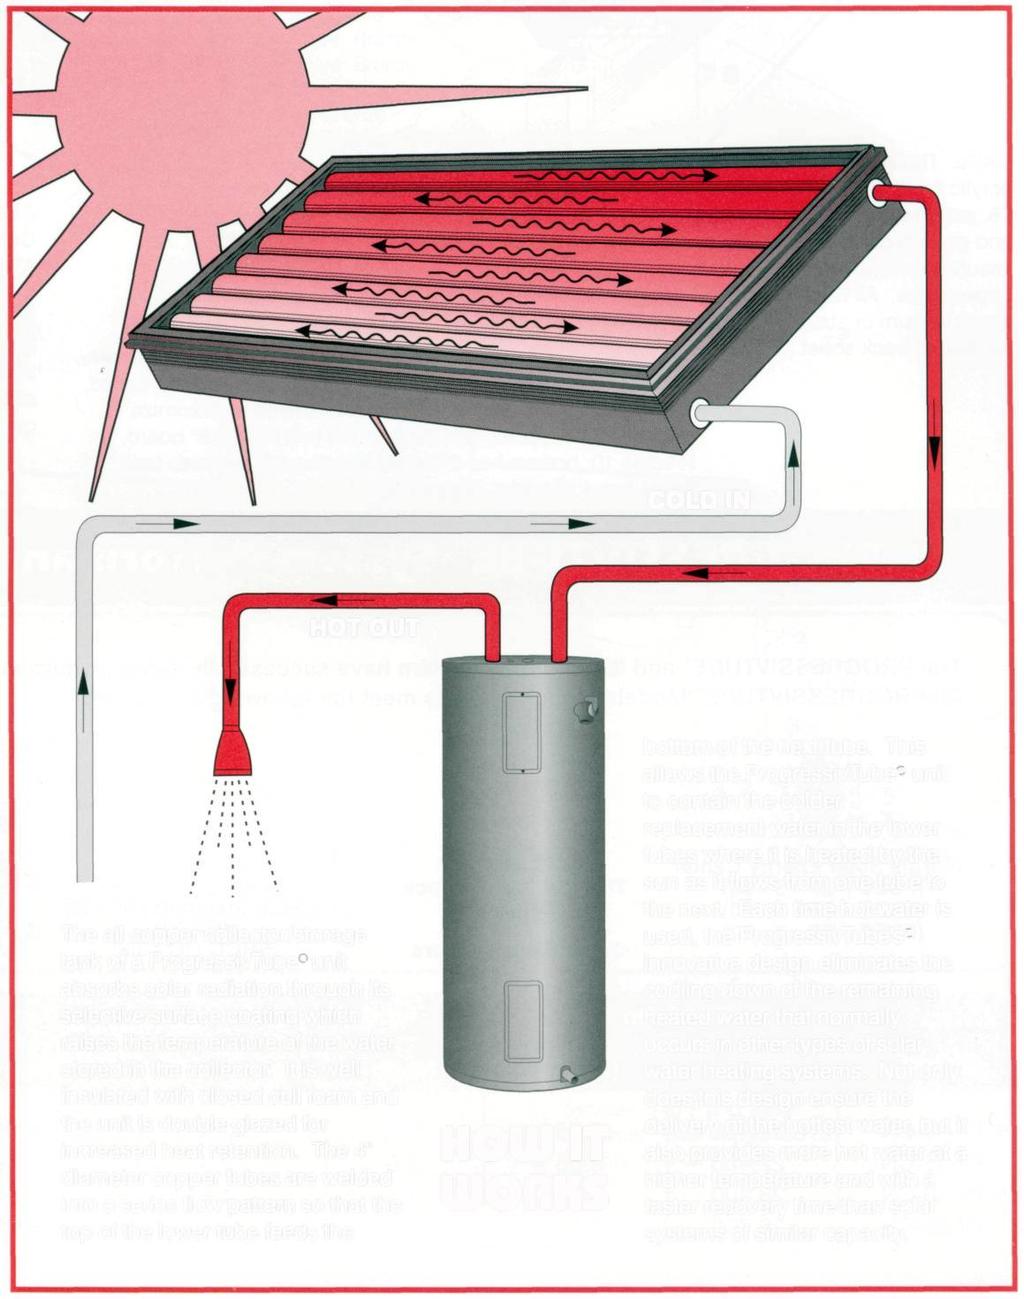 Manufacturer of Solar Thermal Equipment ProgressivTube PASSIVE SOLAR WATER HEATERS The ProgressivTube passive solar water heater is a self-contained unit that acts as a solar collector and storage